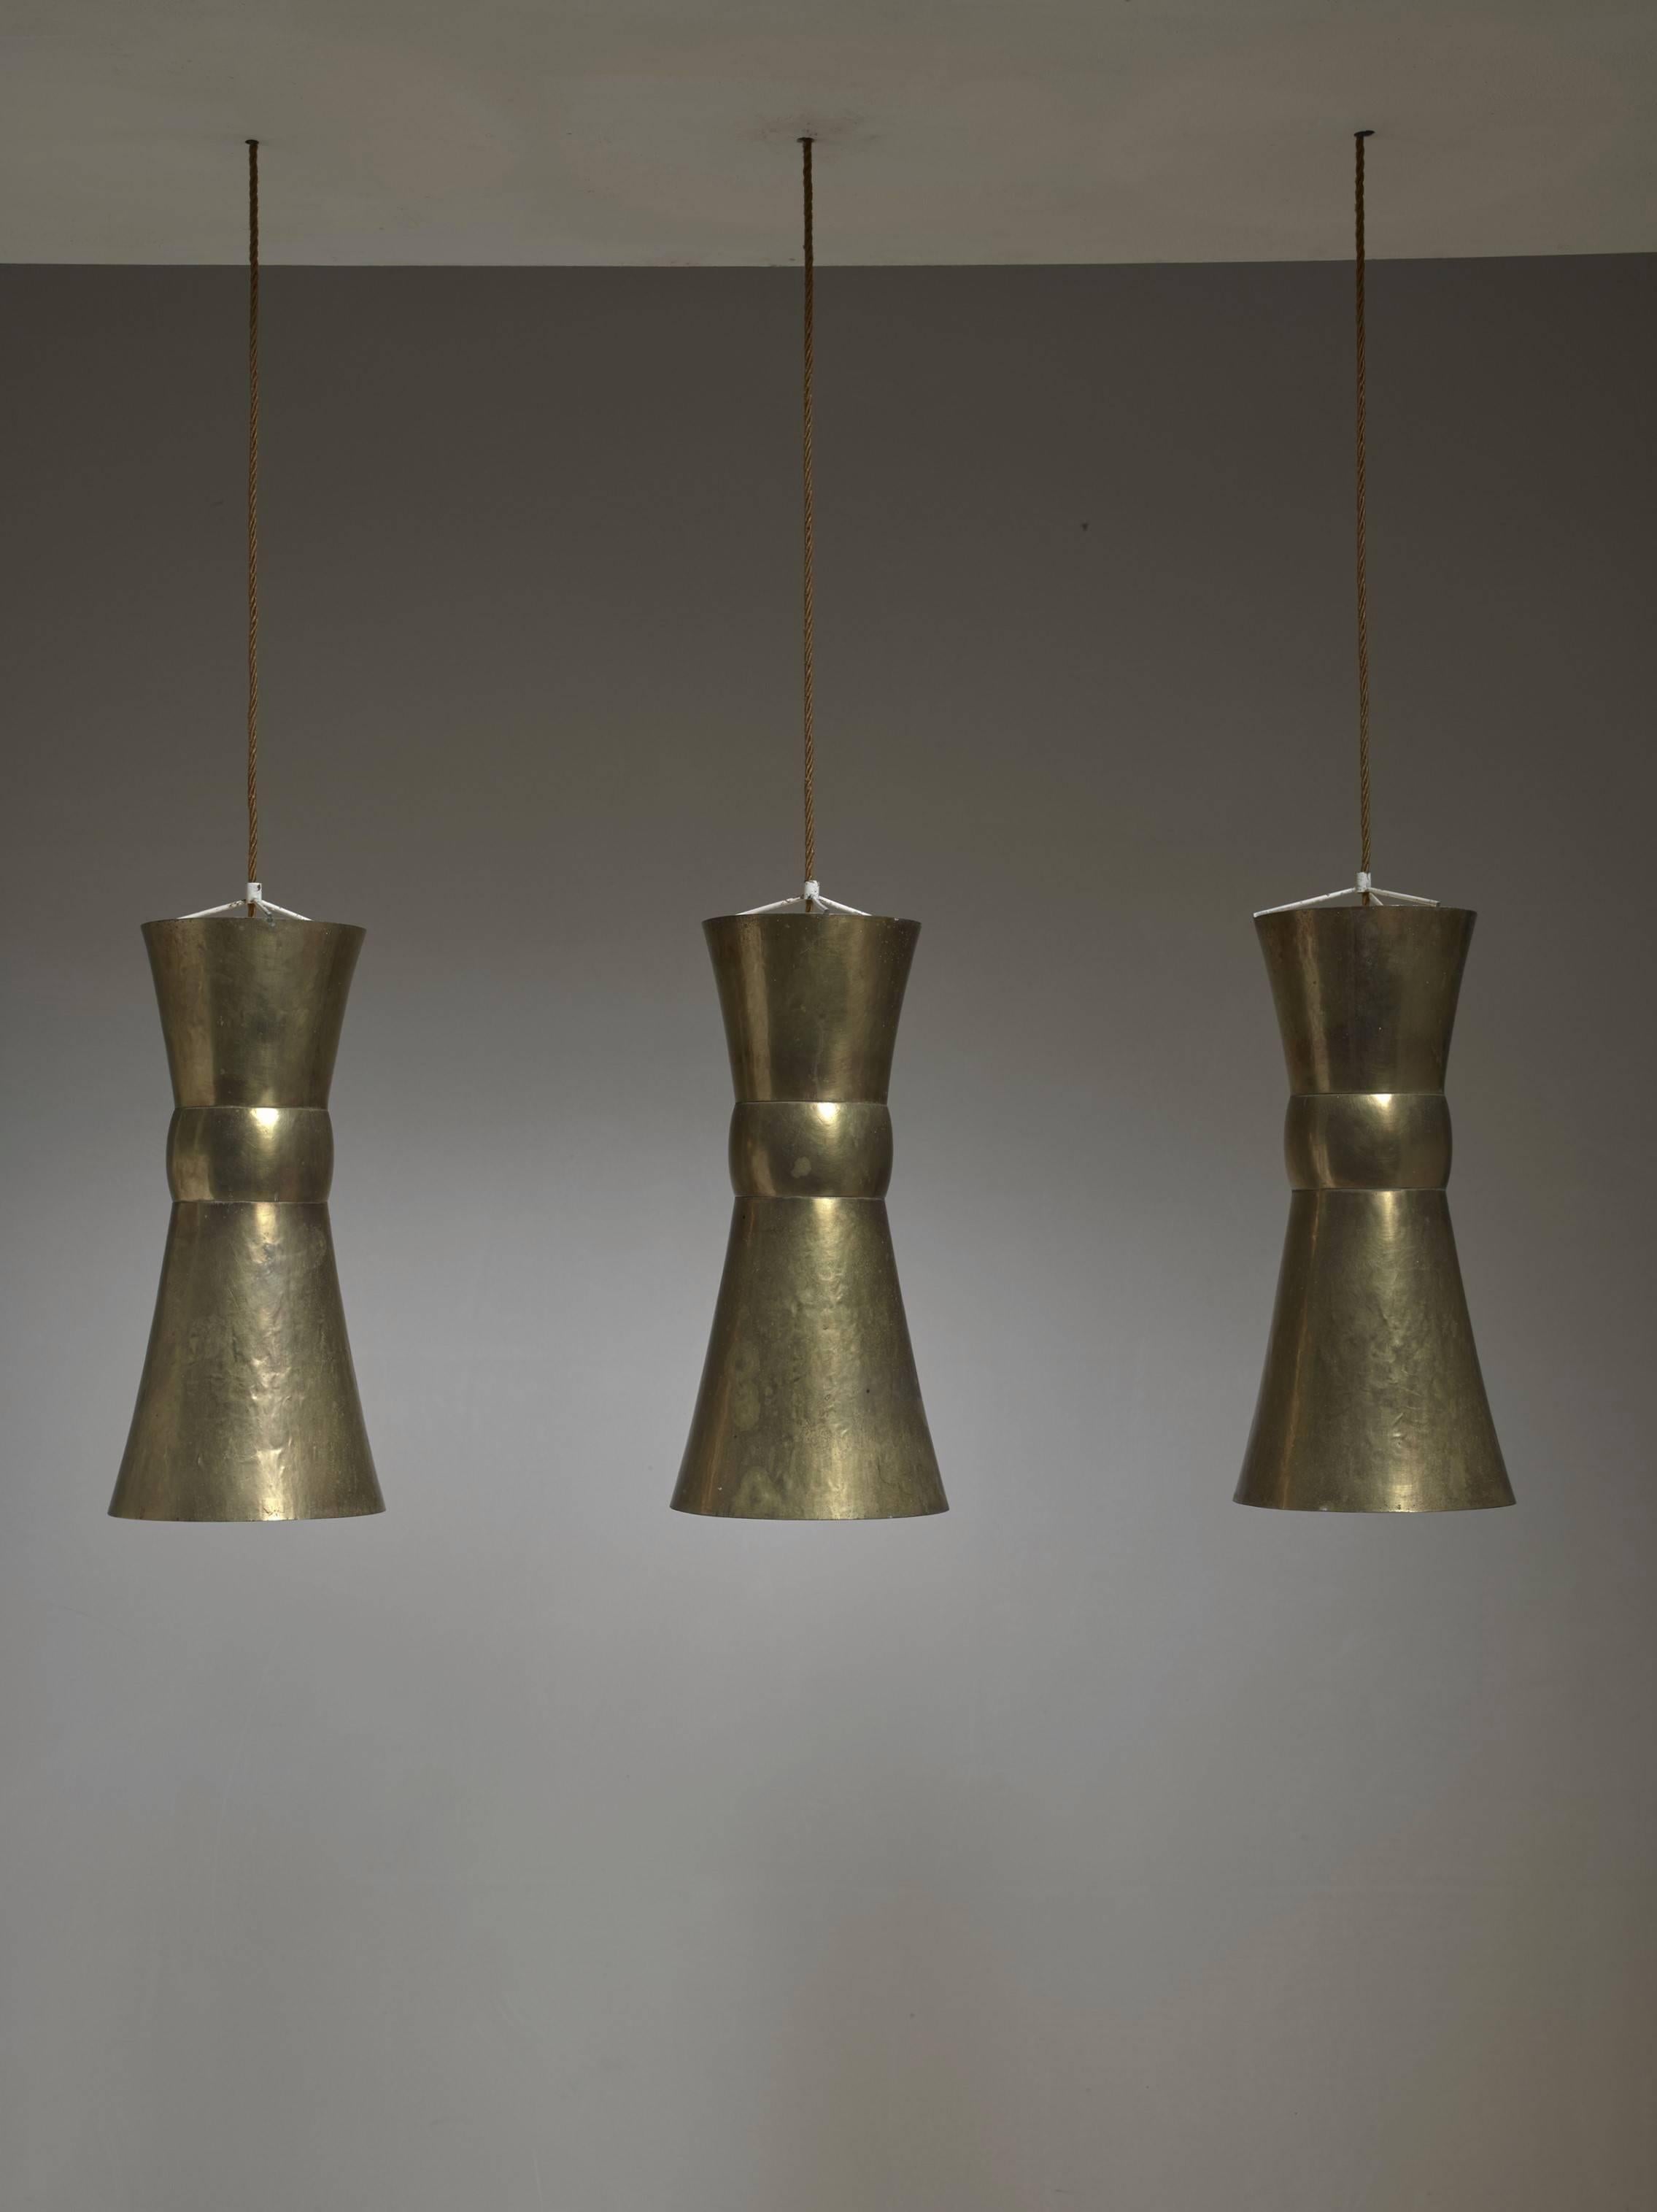 A set of three unique hand-hammered brass pendant lamps by the important German artisan Hayno Focken. These lamps are unique pieces made for a church in the Schwarzwald and come with full documentation.

Focken (1905-1968) was a metalworker and